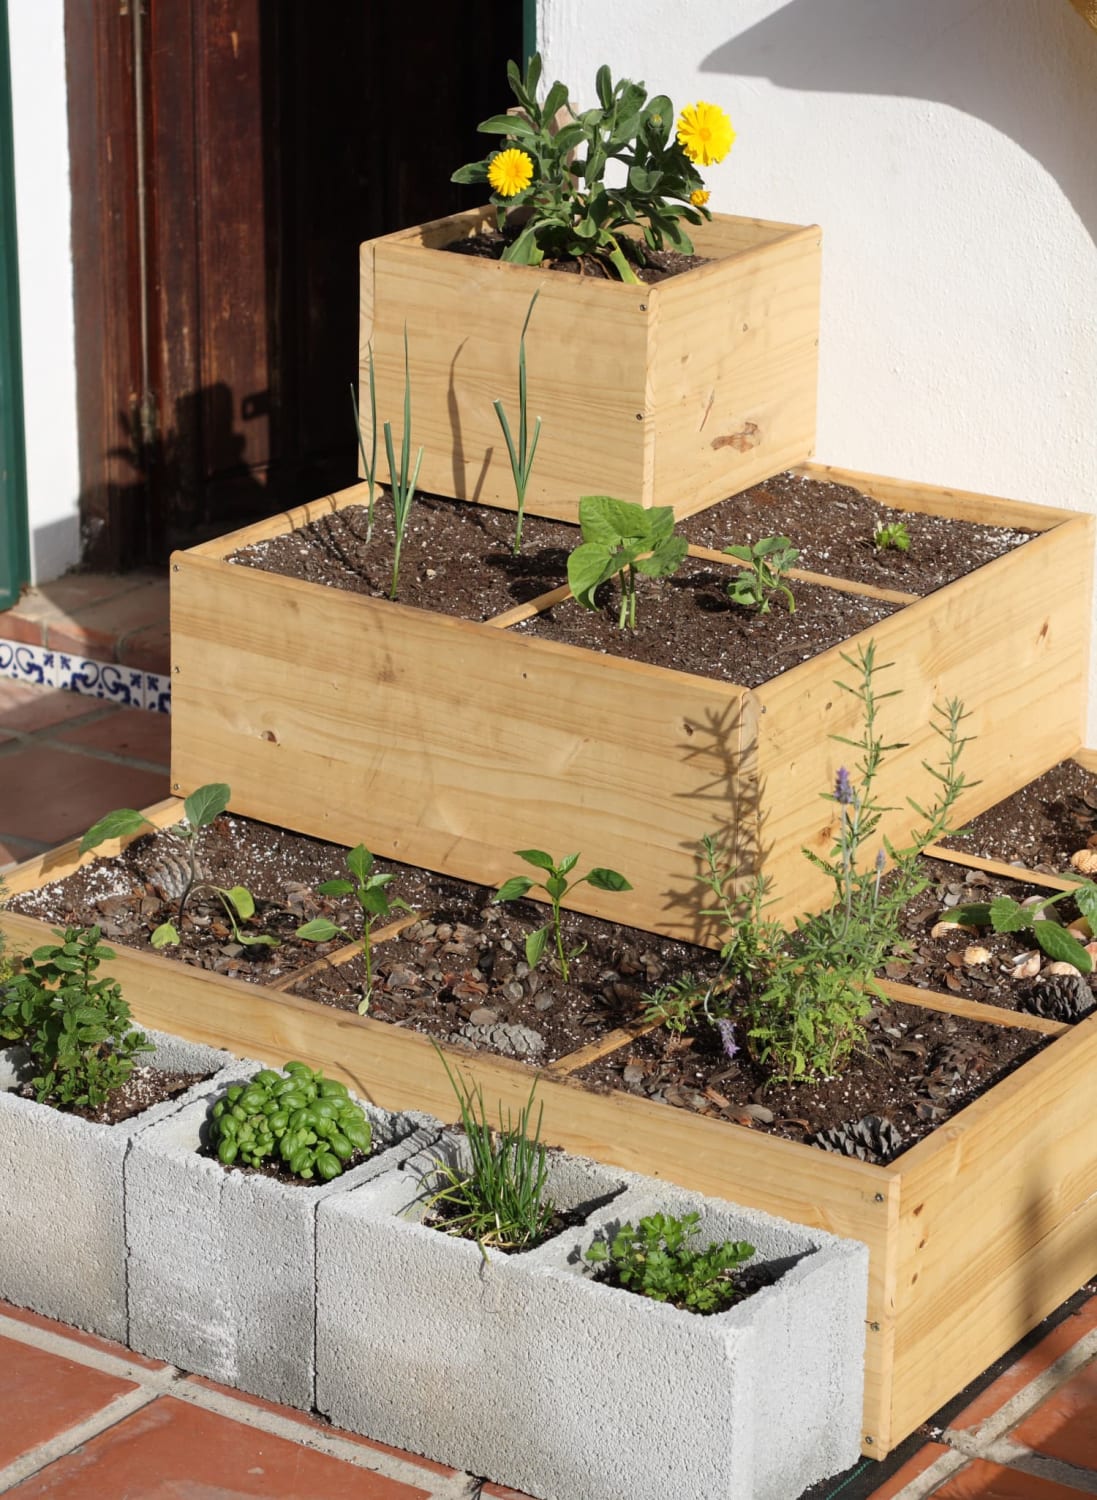 Small Outdoor Space? Consider “Square Foot Gardening”